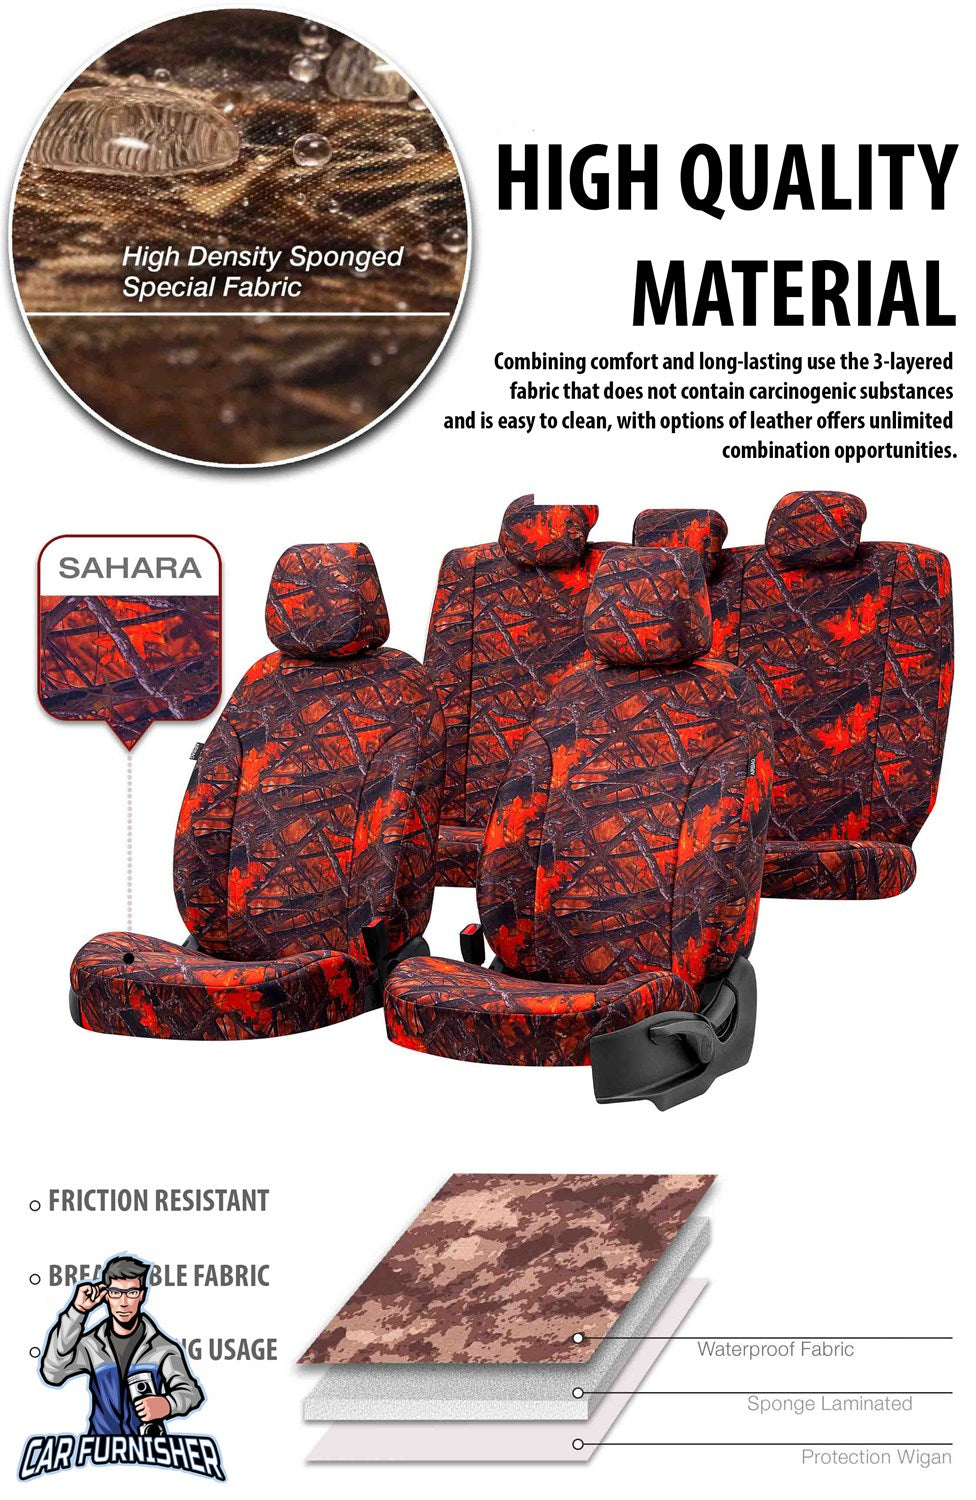 Ford Fusion Seat Covers Camouflage Waterproof Design Arctic Camo Waterproof Fabric